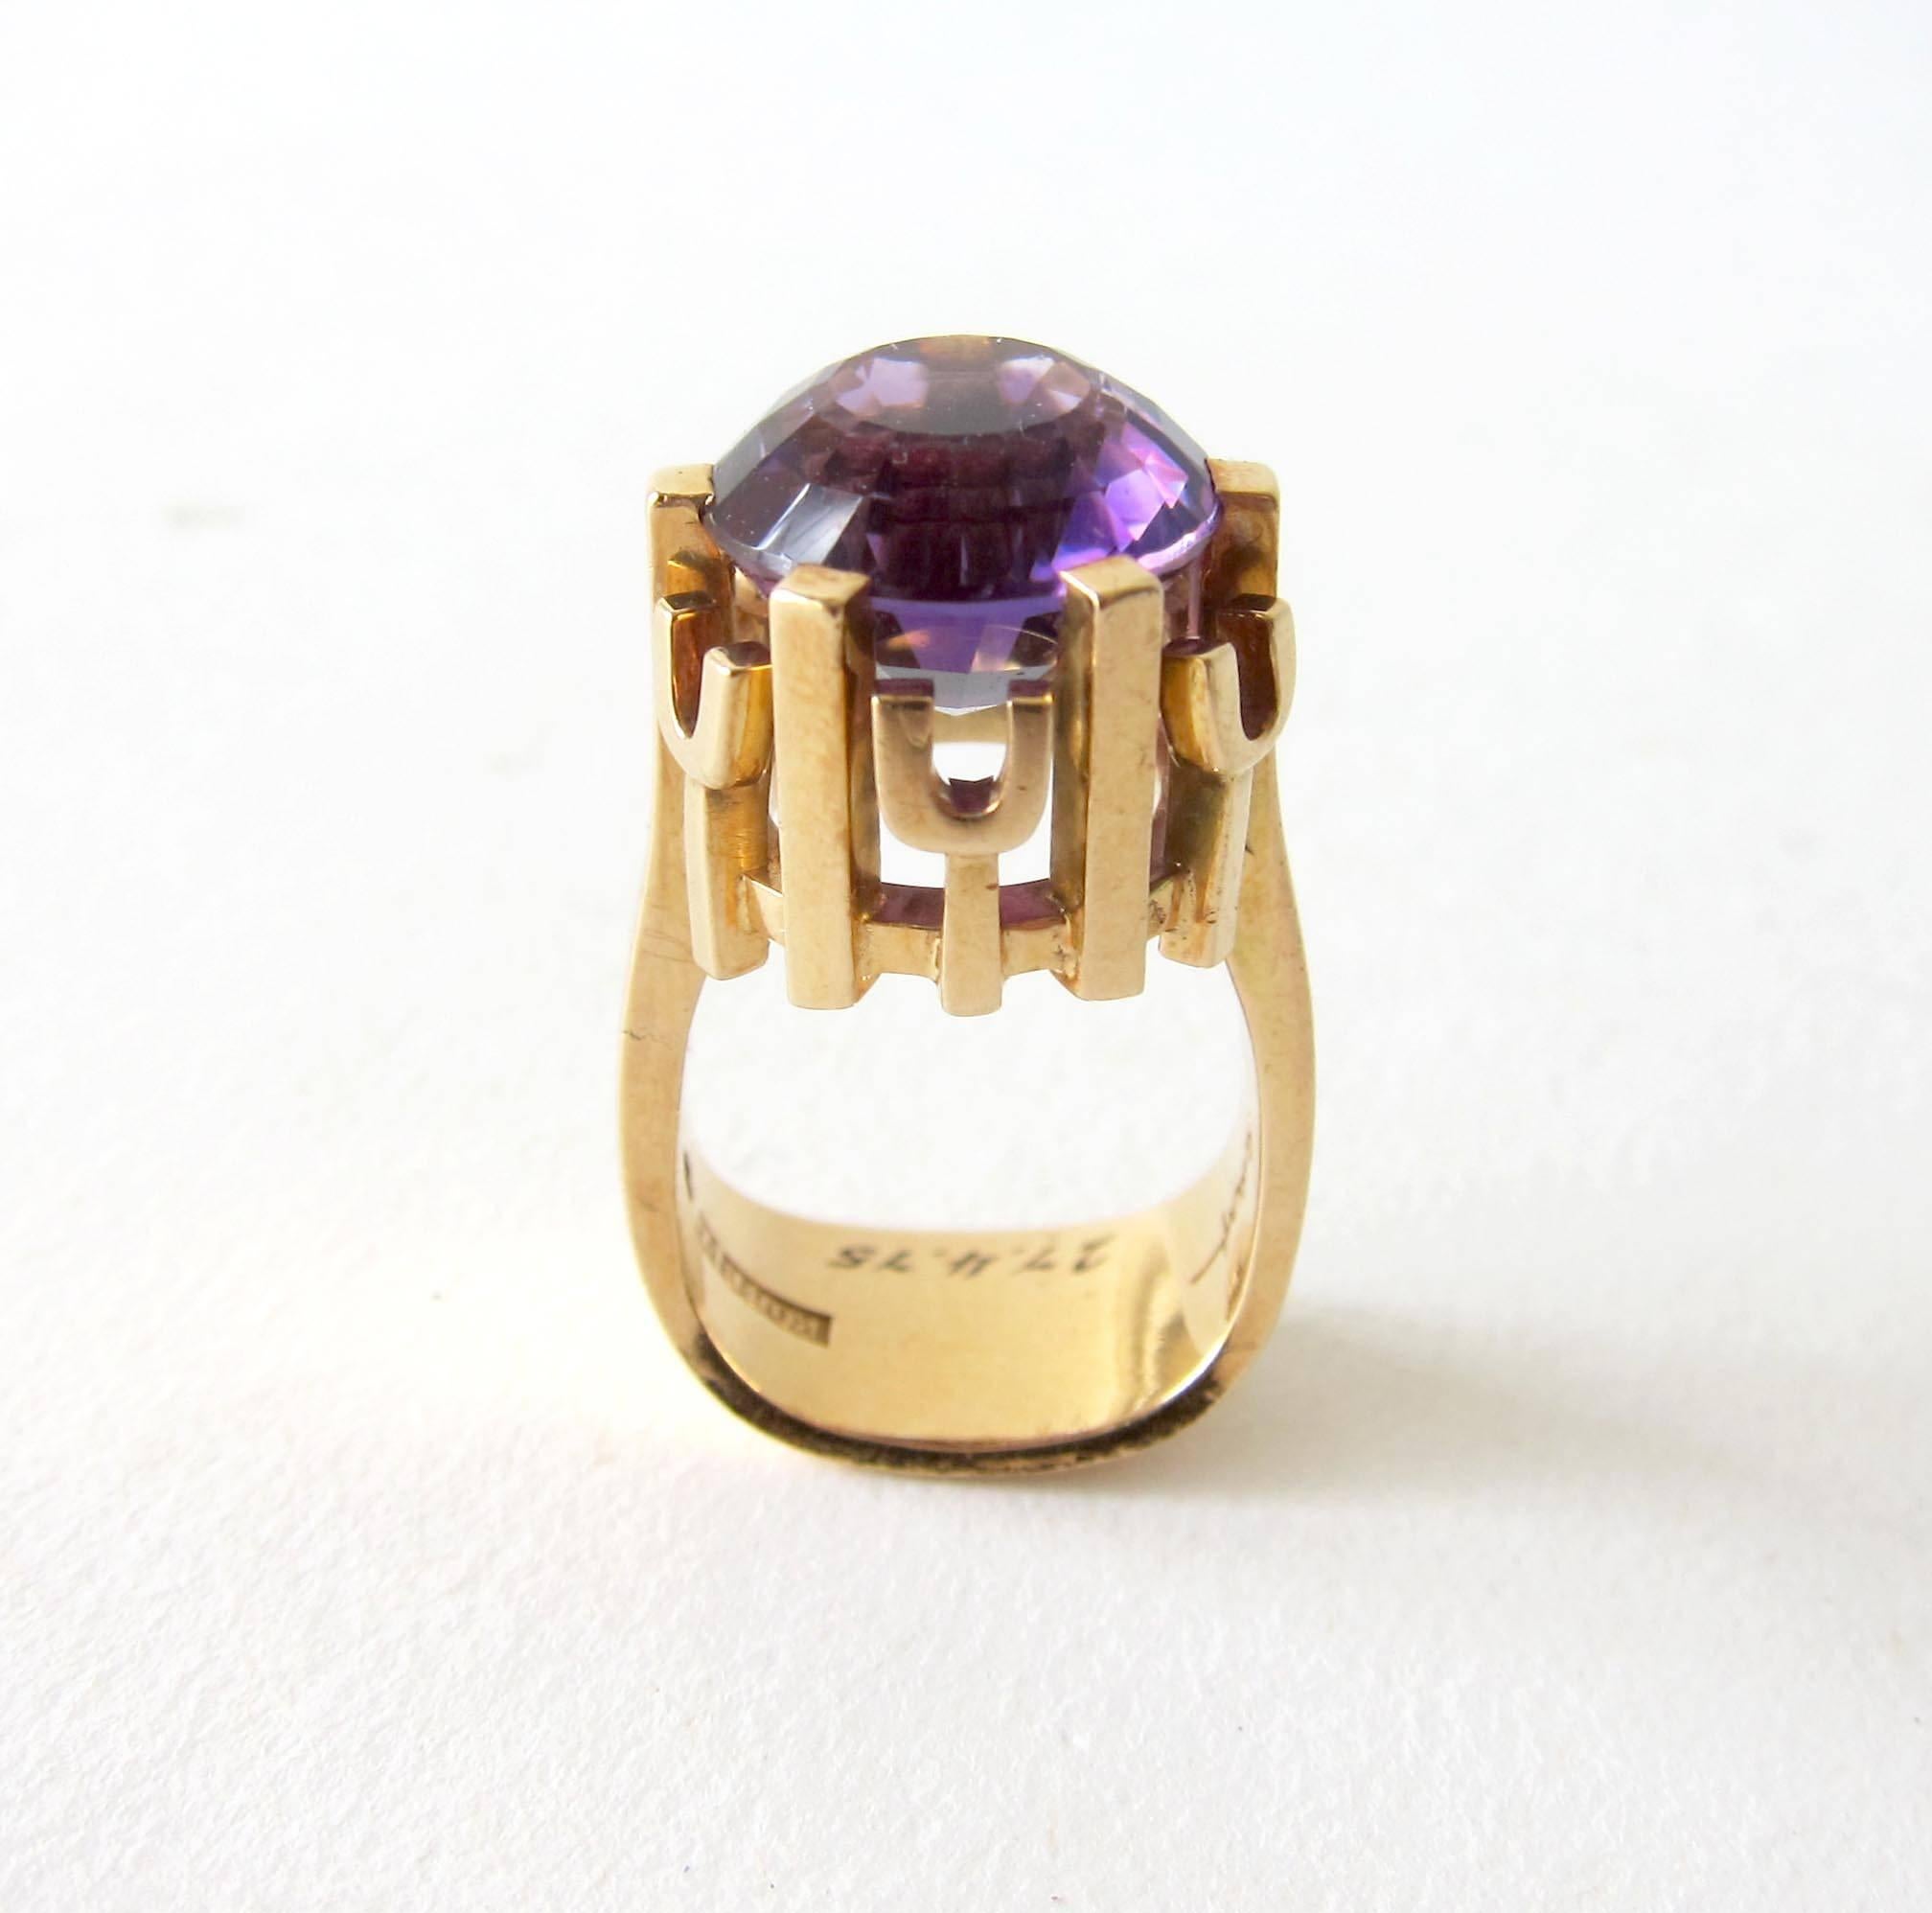 Rare, faceted eight carat amethyst in 18k gold crown like setting created by Robbert of Sweden.  Ring is a finger size 6 and is signed Robbert, Z9 (1974), Triple crown and inscribed 27-4-75. In very good vintage condition.   16.5 grams.